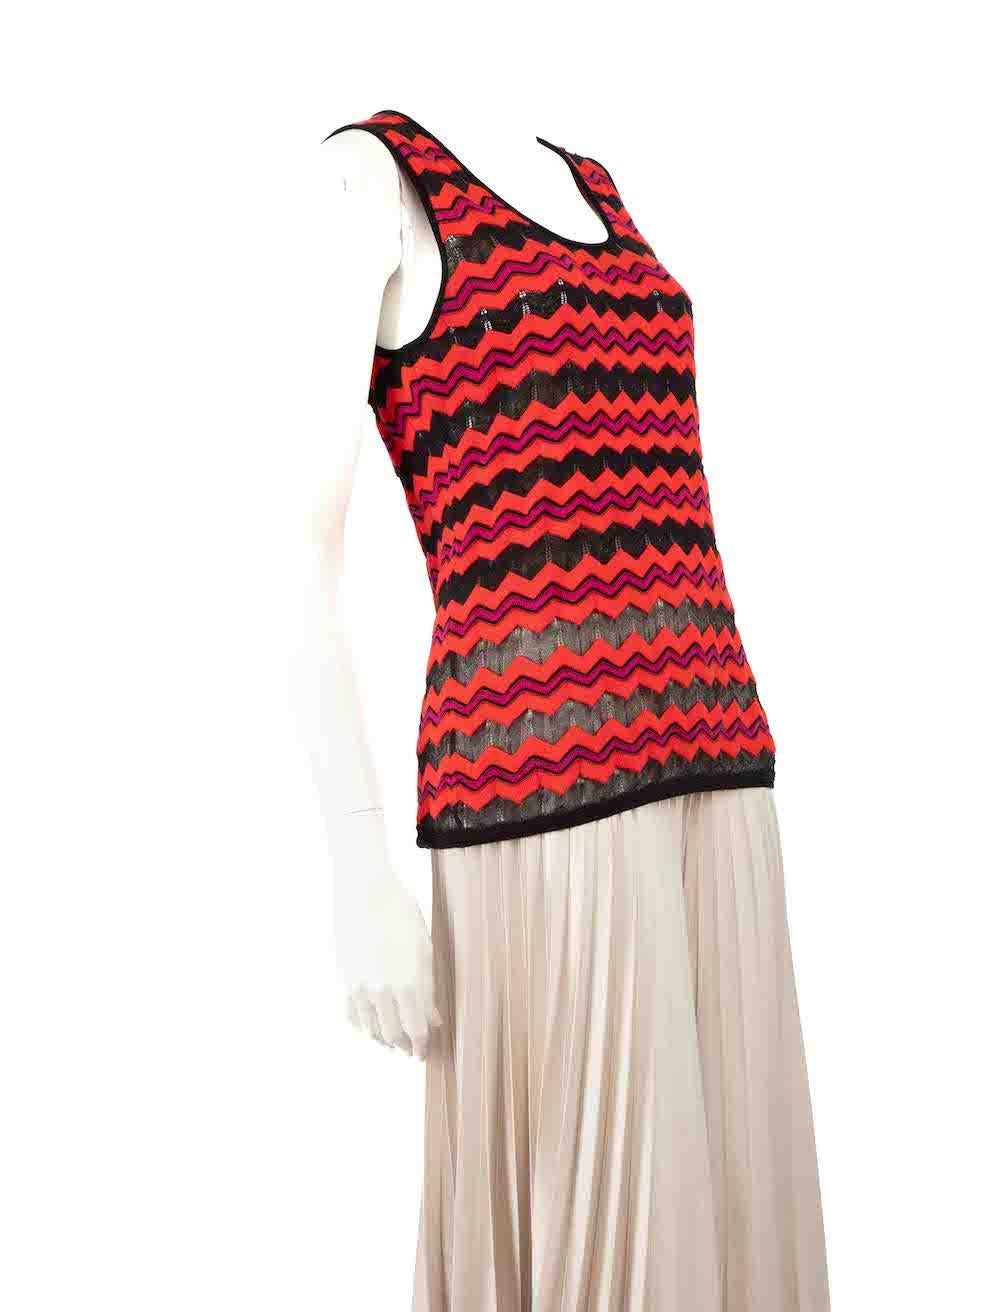 CONDITION is Very good. Hardly any visible wear to top is evident on this used Missoni designer resale item.
 
 
 
 Details
 
 
 Red
 
 Cotton
 
 Knit top
 
 Black zigzag striped pattern
 
 Sleeveless
 
 Round neck
 
 
 
 
 
 Made in Romania
 
 
 
